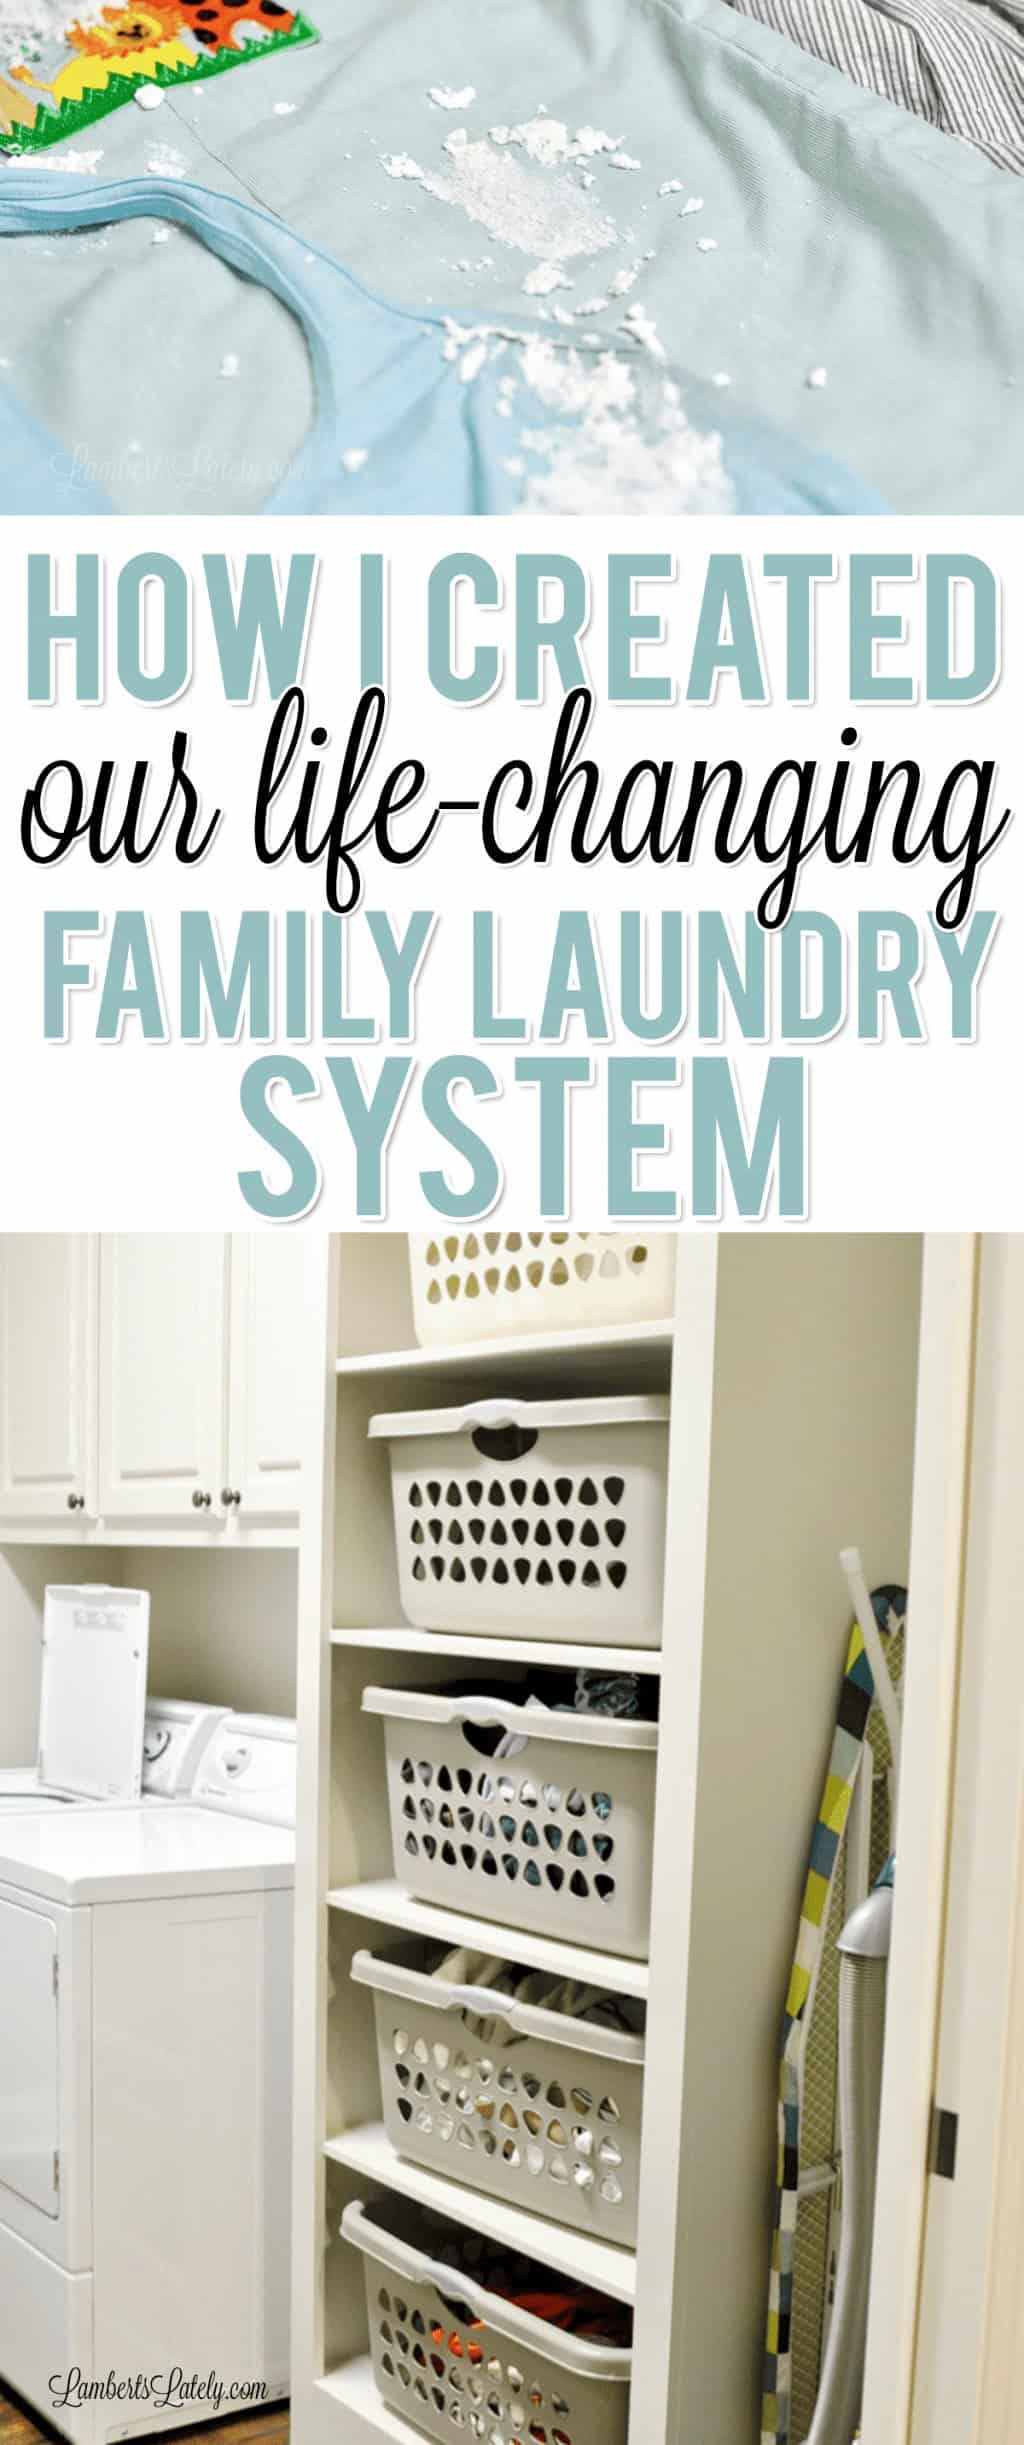 how i created our life changing family laundry system.